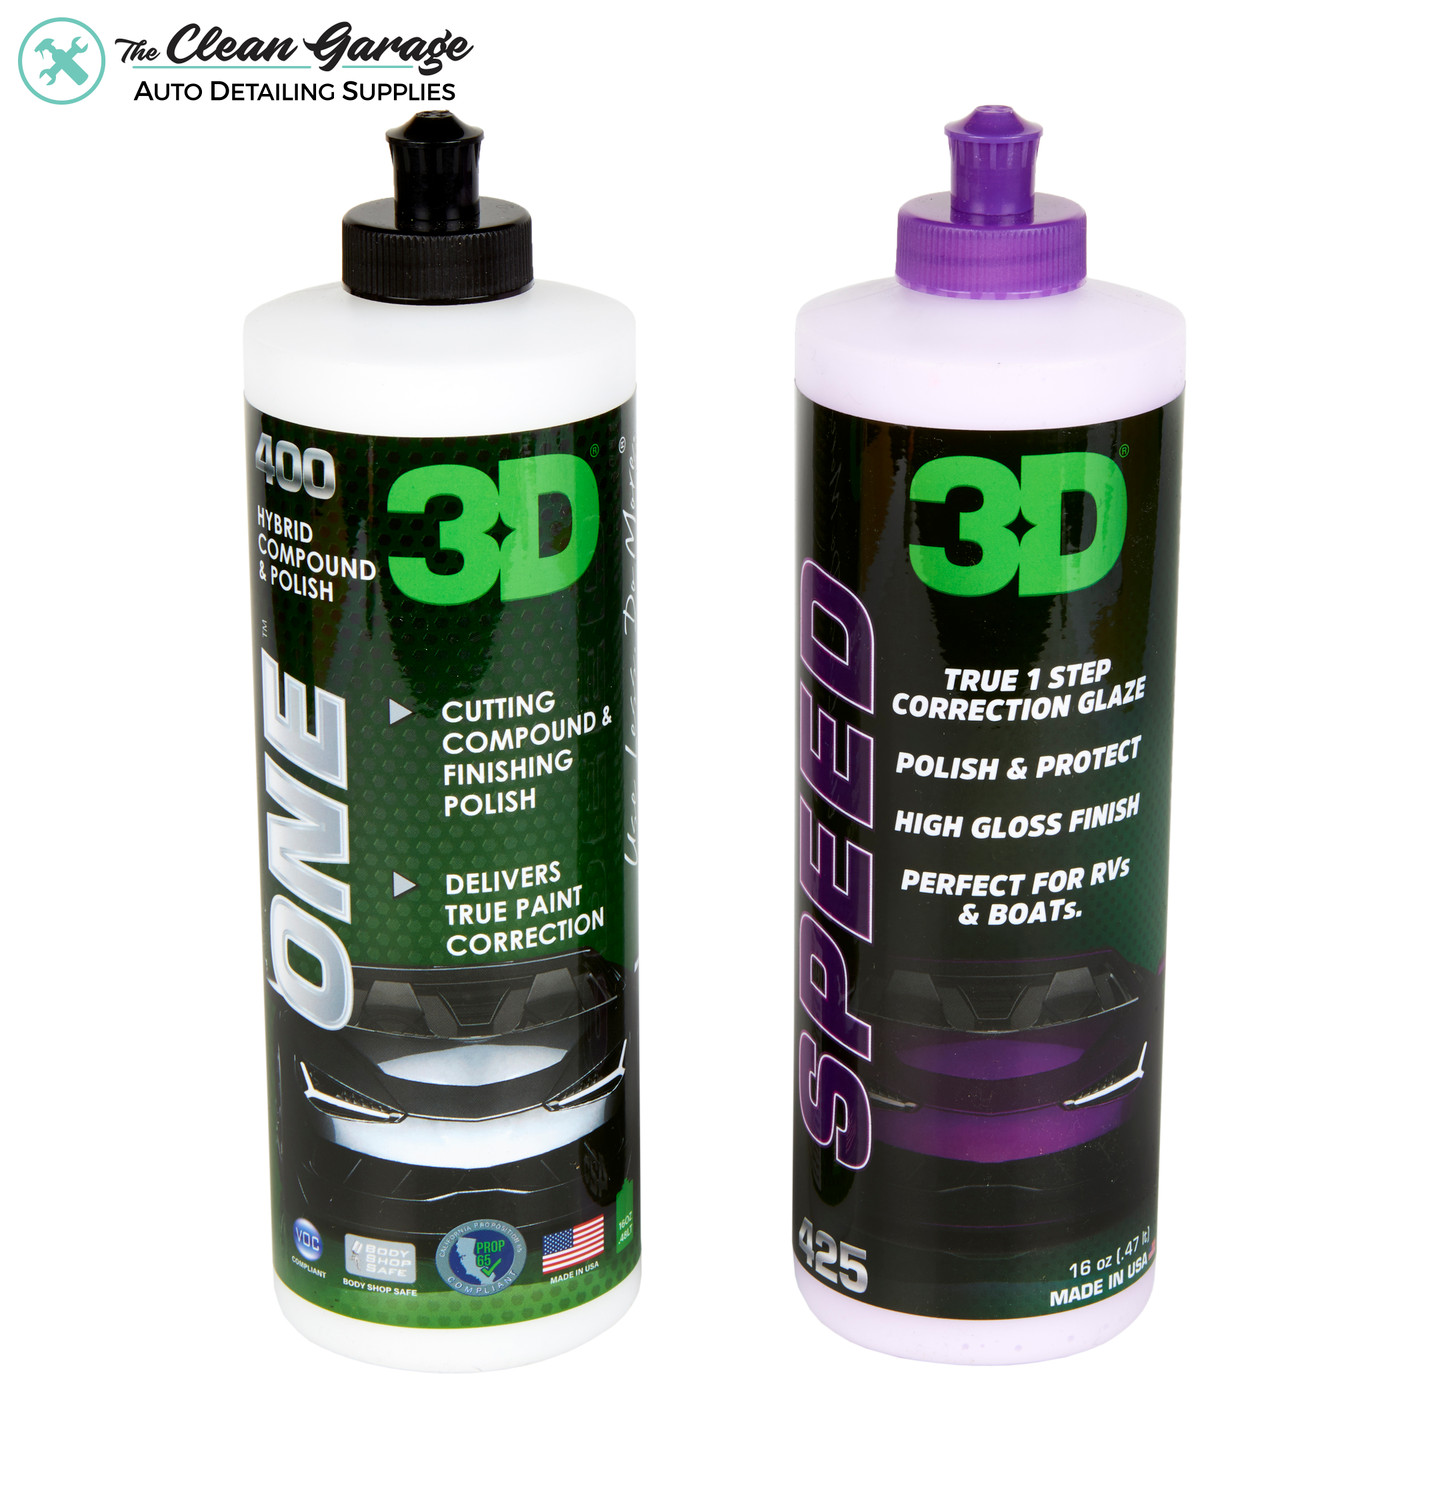 16oz 3D ONE & SPEED Combo-Rubbing Compound-Polish-All In One Kit